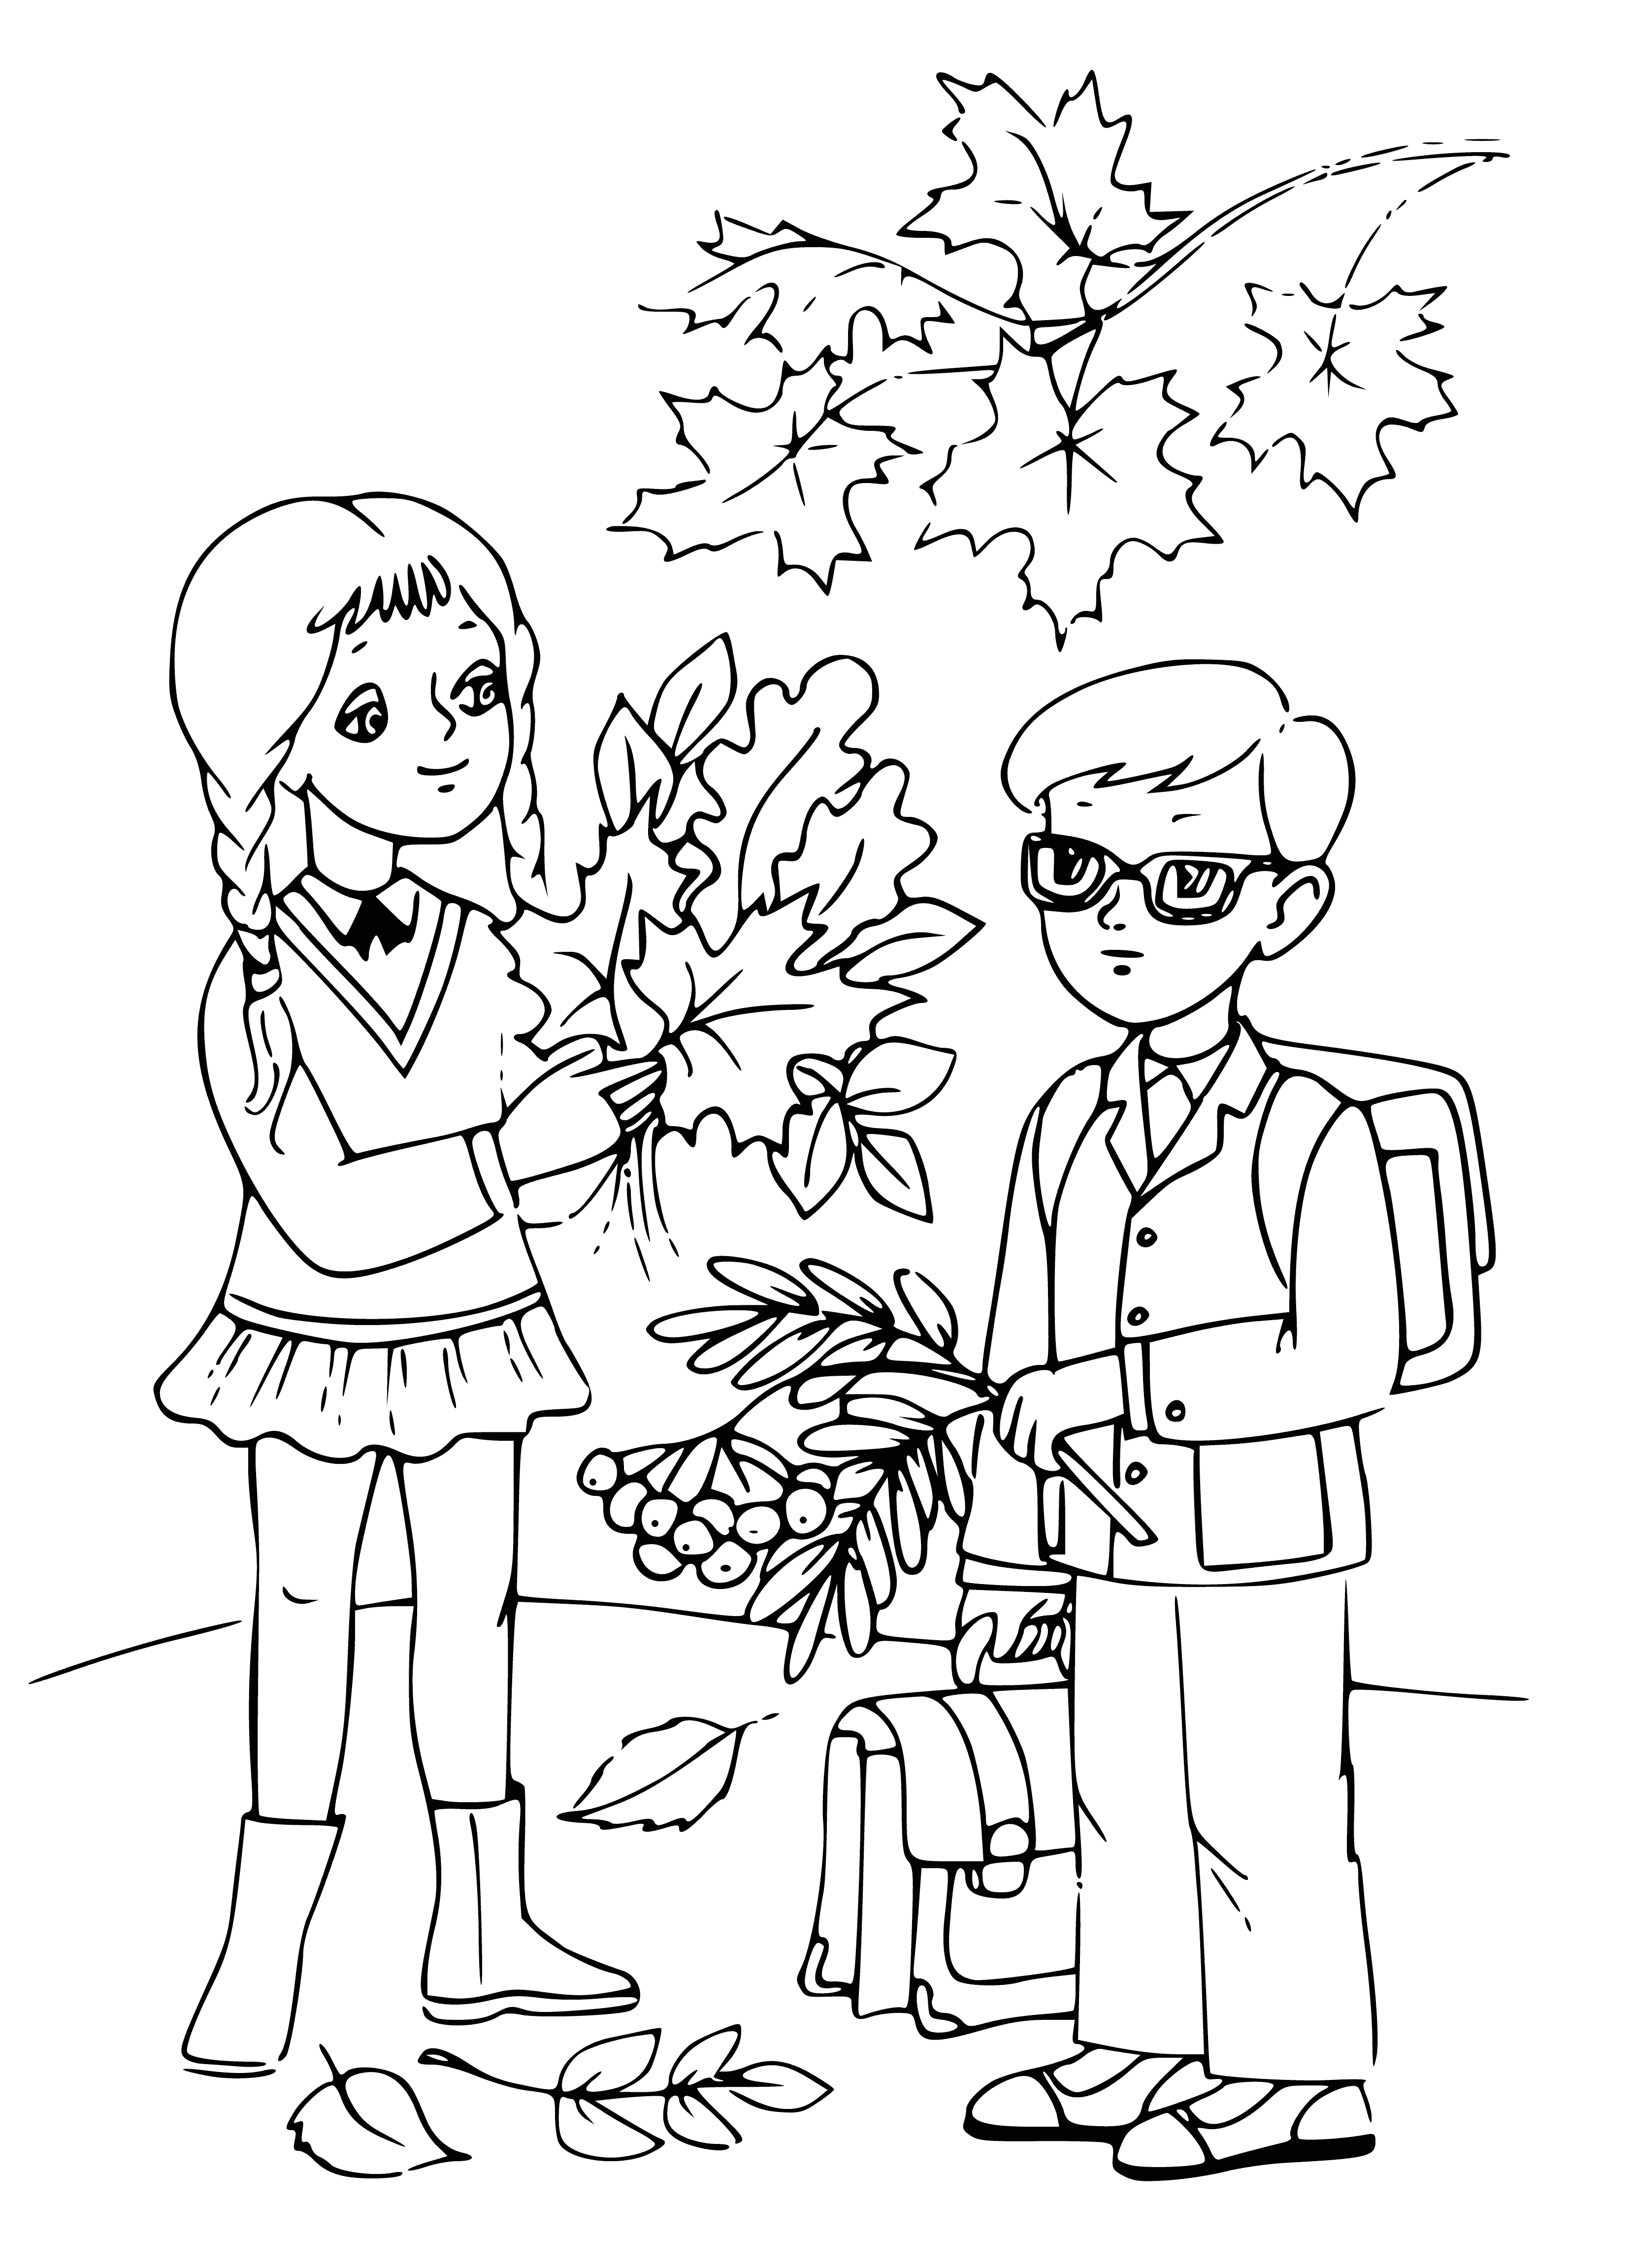 coloring page: Autumn days: Leaves falling, trees changing, ground covered, sky a clear blue.